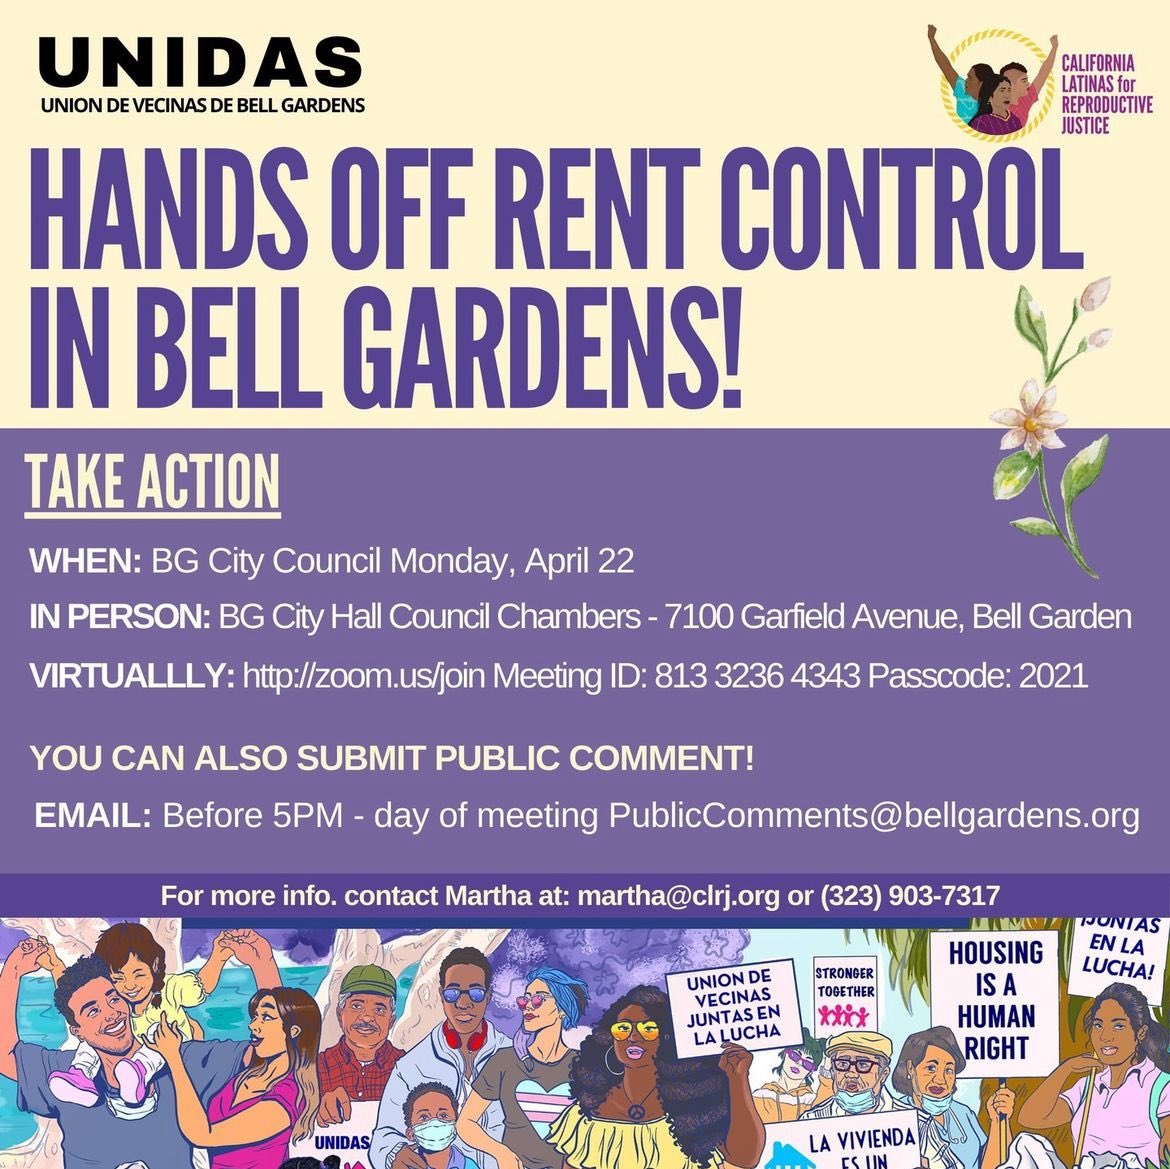 🚨ACTION ALERT!🚨 Rent increases hurt our communities. 📣 Submit your support by 5pm today PublicComments@bellgardens.org 📣 Attend today at 6pm via zoom: zoom.us/join Meeting ID: 813 3236 4343 Code:2021 in person: BG City Hall Council Chambers - 7100 Garfield Ave.